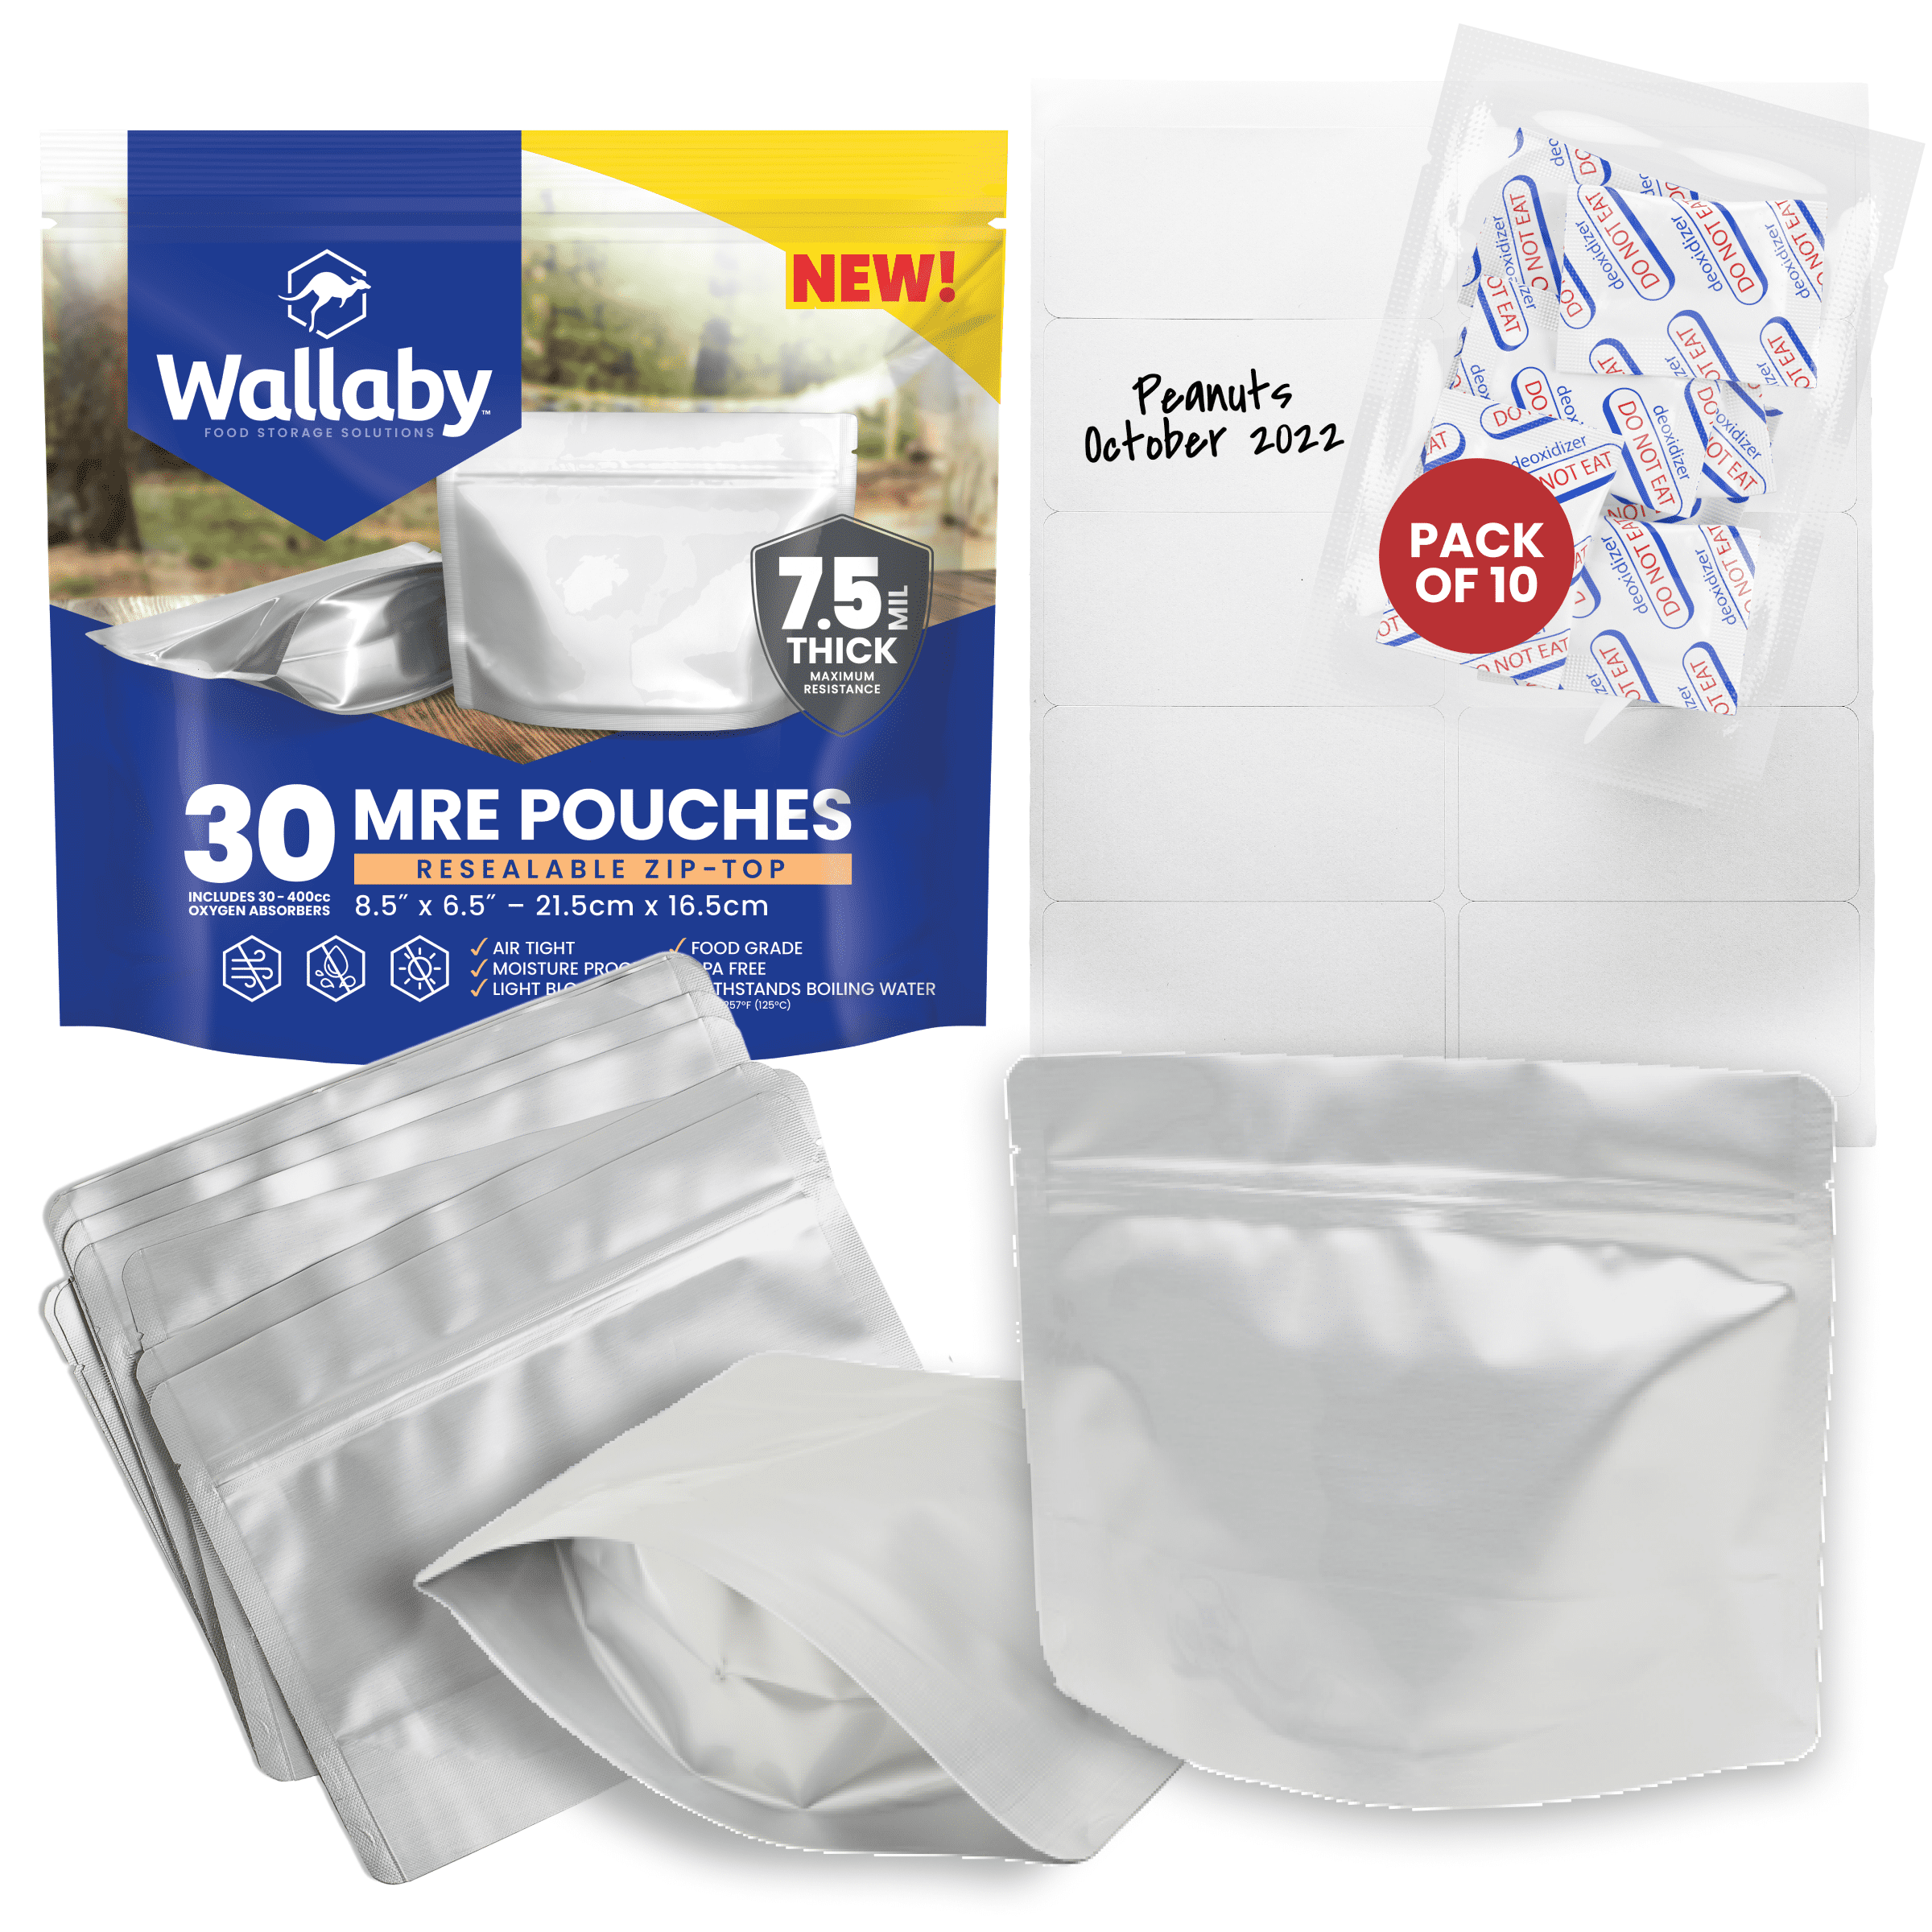 5 Gallon Mylar Bags for Food Storage, Mylar Bags with Oxygen